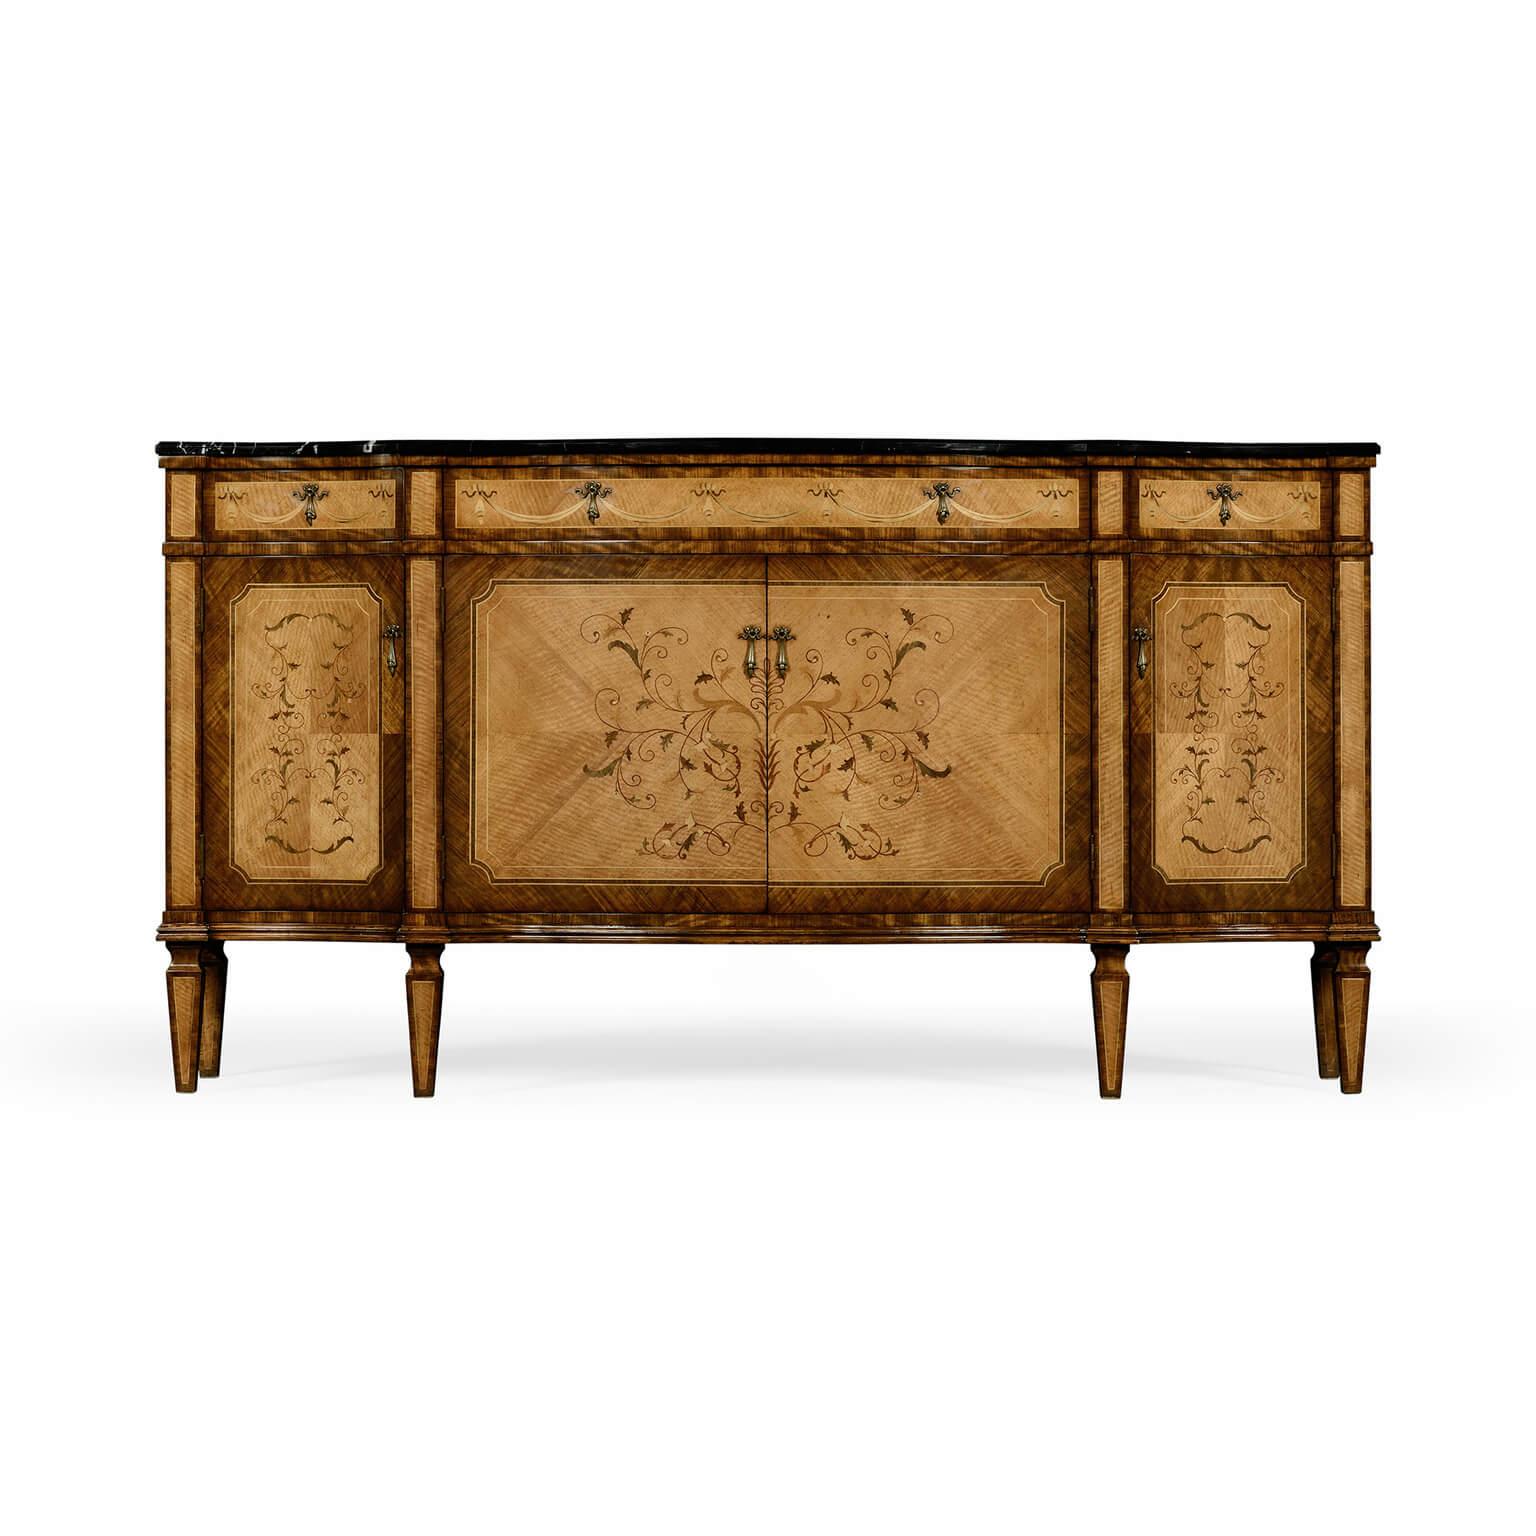 Striking satinwood veneered serpentine bowfront sideboard with black marble top, the four doors and three drawers with fine contrasting floral inlays and swagged brass handles. Raised on tapering block feet with contrasting stringing.

Dimensions: